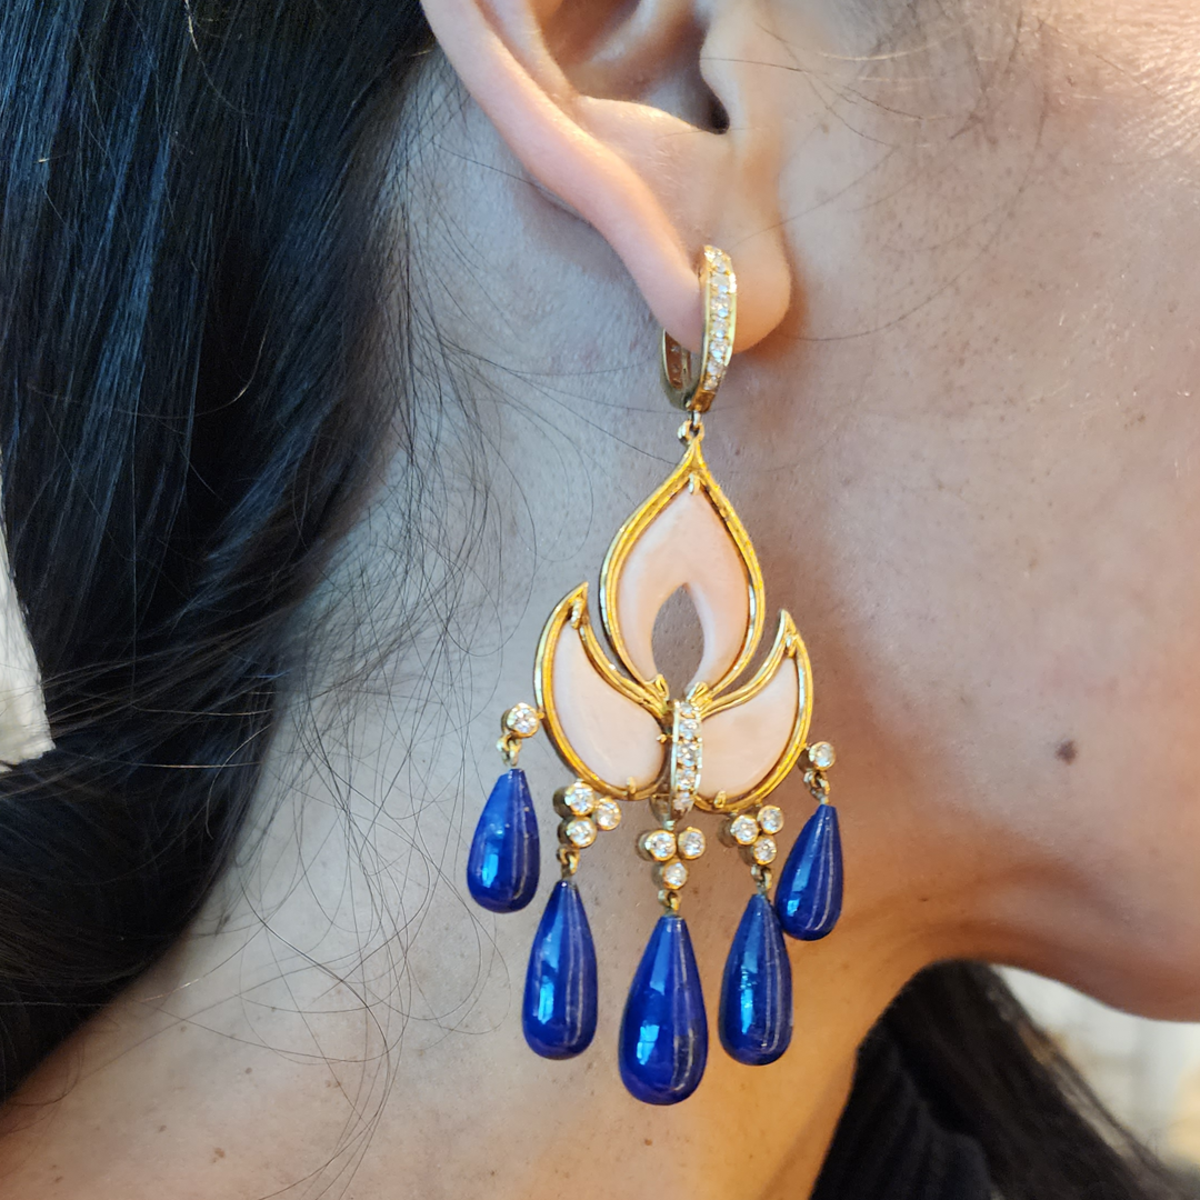 1970s 18KT Yellow Gold Diamond, Coral & Lapis Lazuli Floral Earrings worn on ear